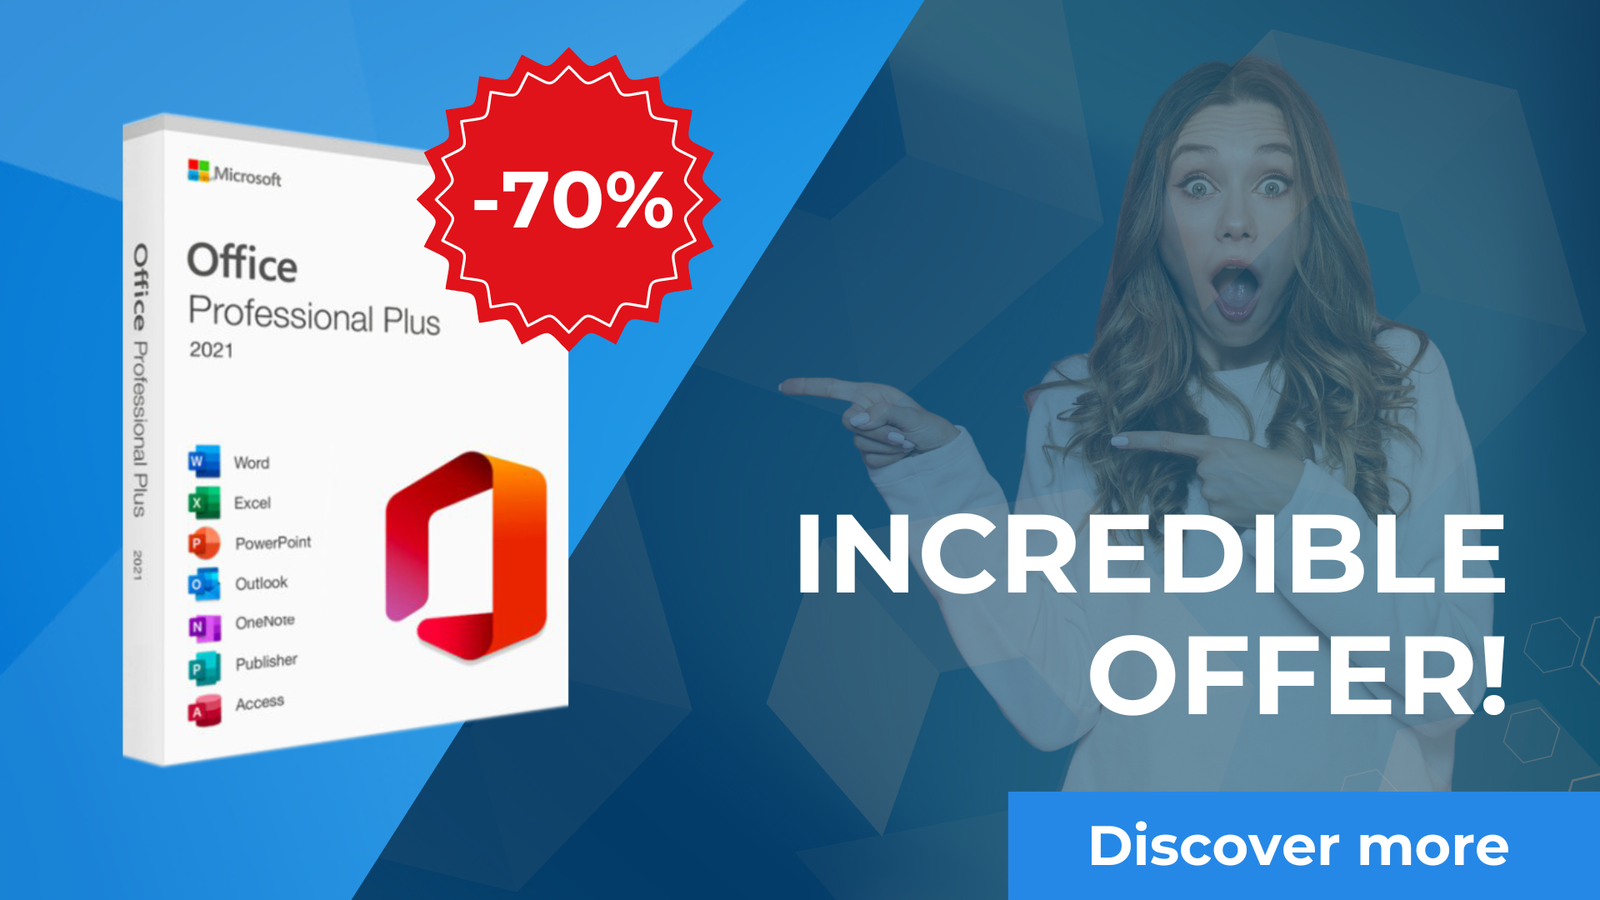 microsoft office deal 70% off